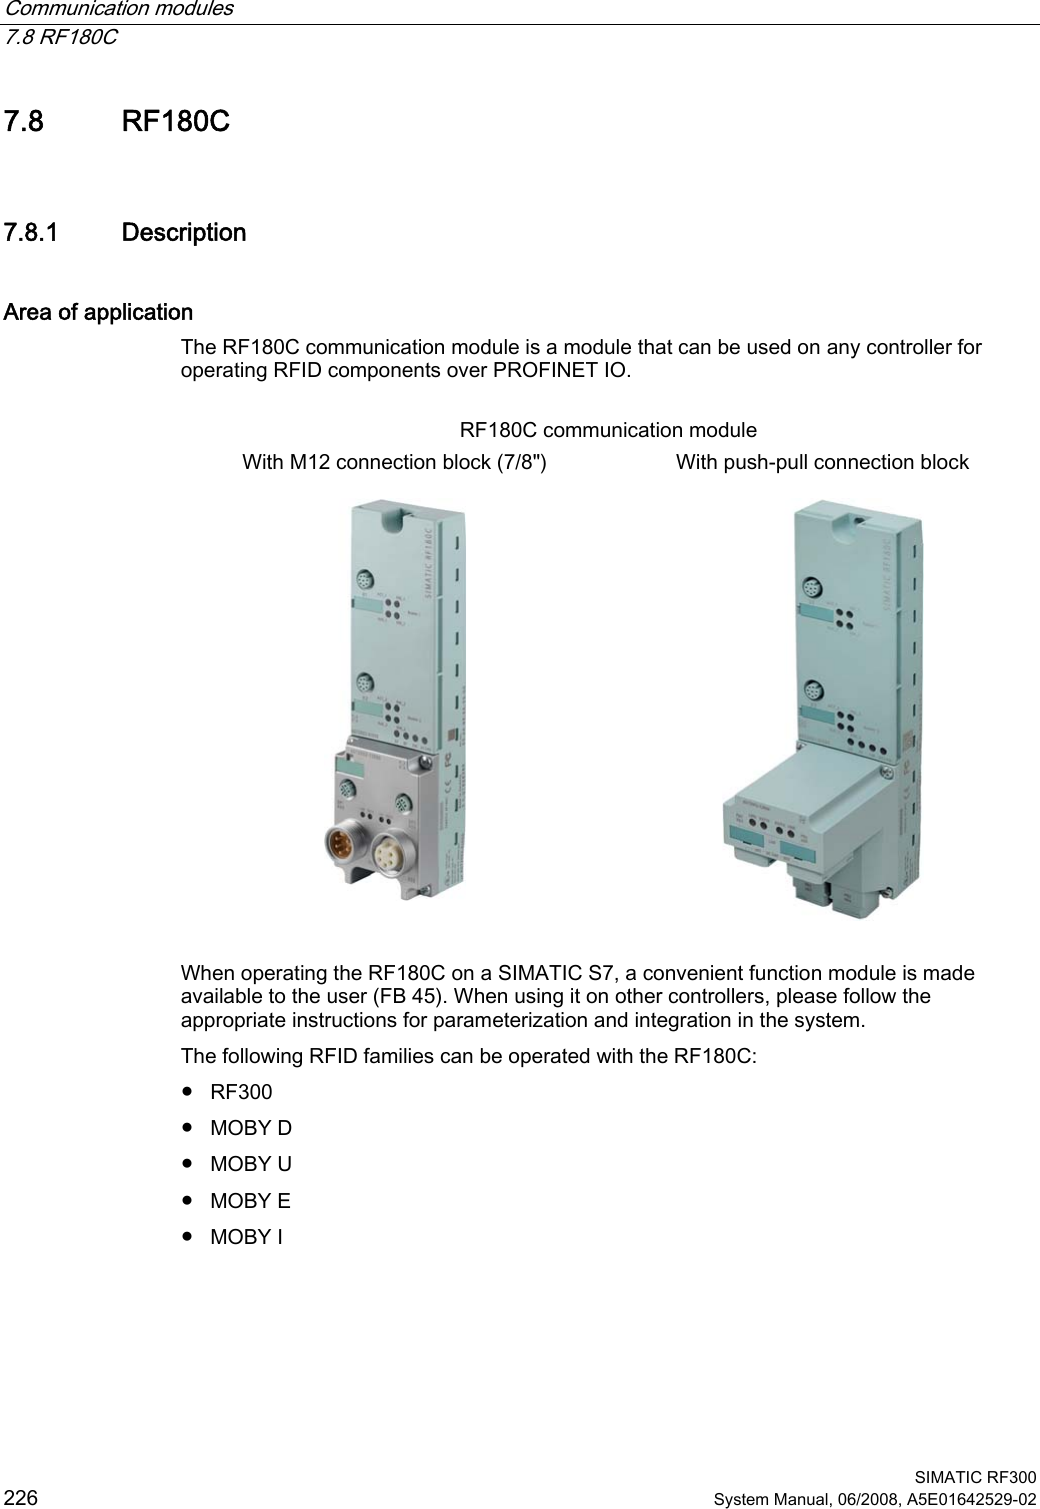 Communication modules   7.8 RF180C  SIMATIC RF300 226 System Manual, 06/2008, A5E01642529-02 7.8 RF180C 7.8.1 Description Area of application The RF180C communication module is a module that can be used on any controller for operating RFID components over PROFINET IO.  RF180C communication module With M12 connection block (7/8&quot;)  With push-pull connection block         When operating the RF180C on a SIMATIC S7, a convenient function module is made available to the user (FB 45). When using it on other controllers, please follow the appropriate instructions for parameterization and integration in the system. The following RFID families can be operated with the RF180C: ● RF300 ● MOBY D ● MOBY U ● MOBY E ● MOBY I 